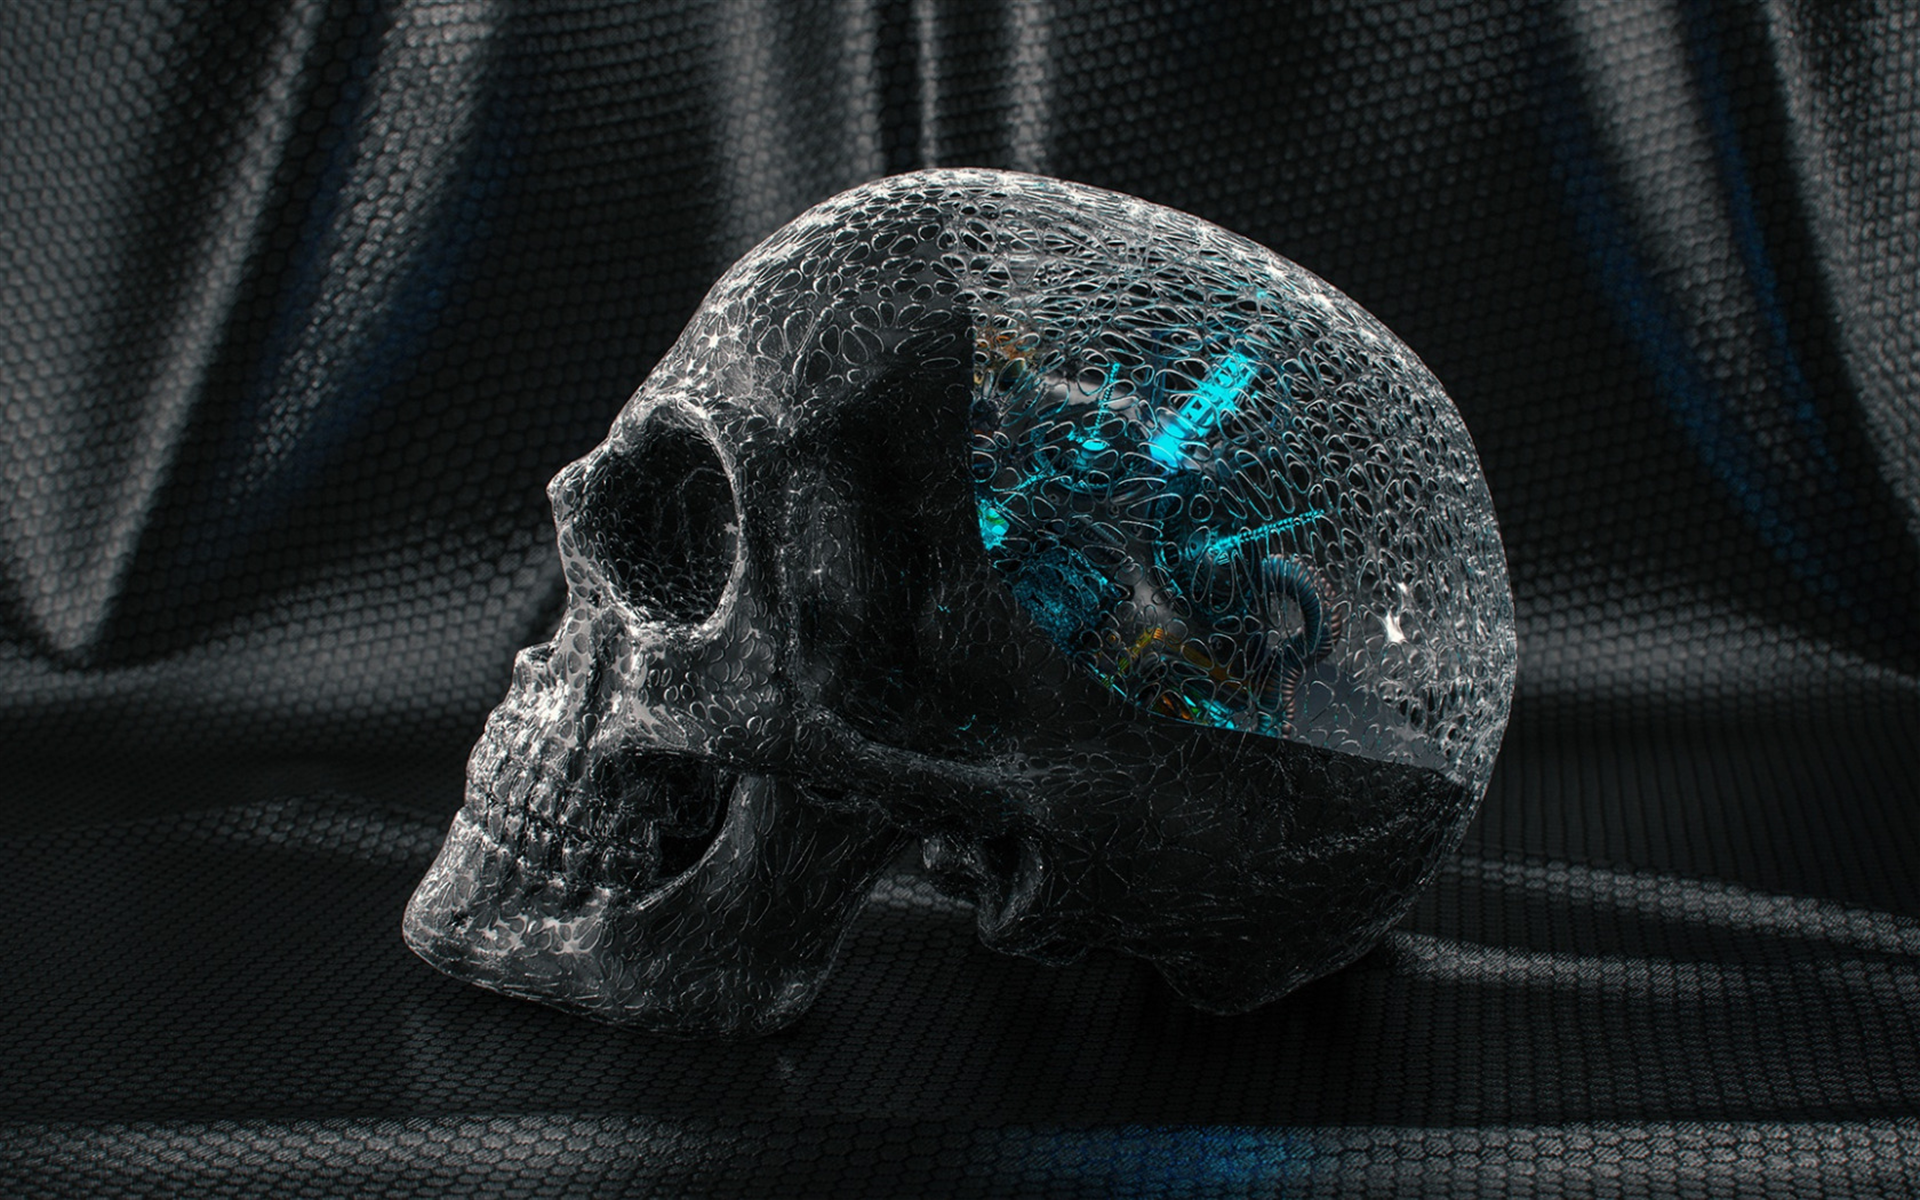 Download wallpaper 3D skull, carbon model of the skull, artificial intelligence concepts, skull, creative art for desktop with resolution 1920x1200. High Quality HD picture wallpaper